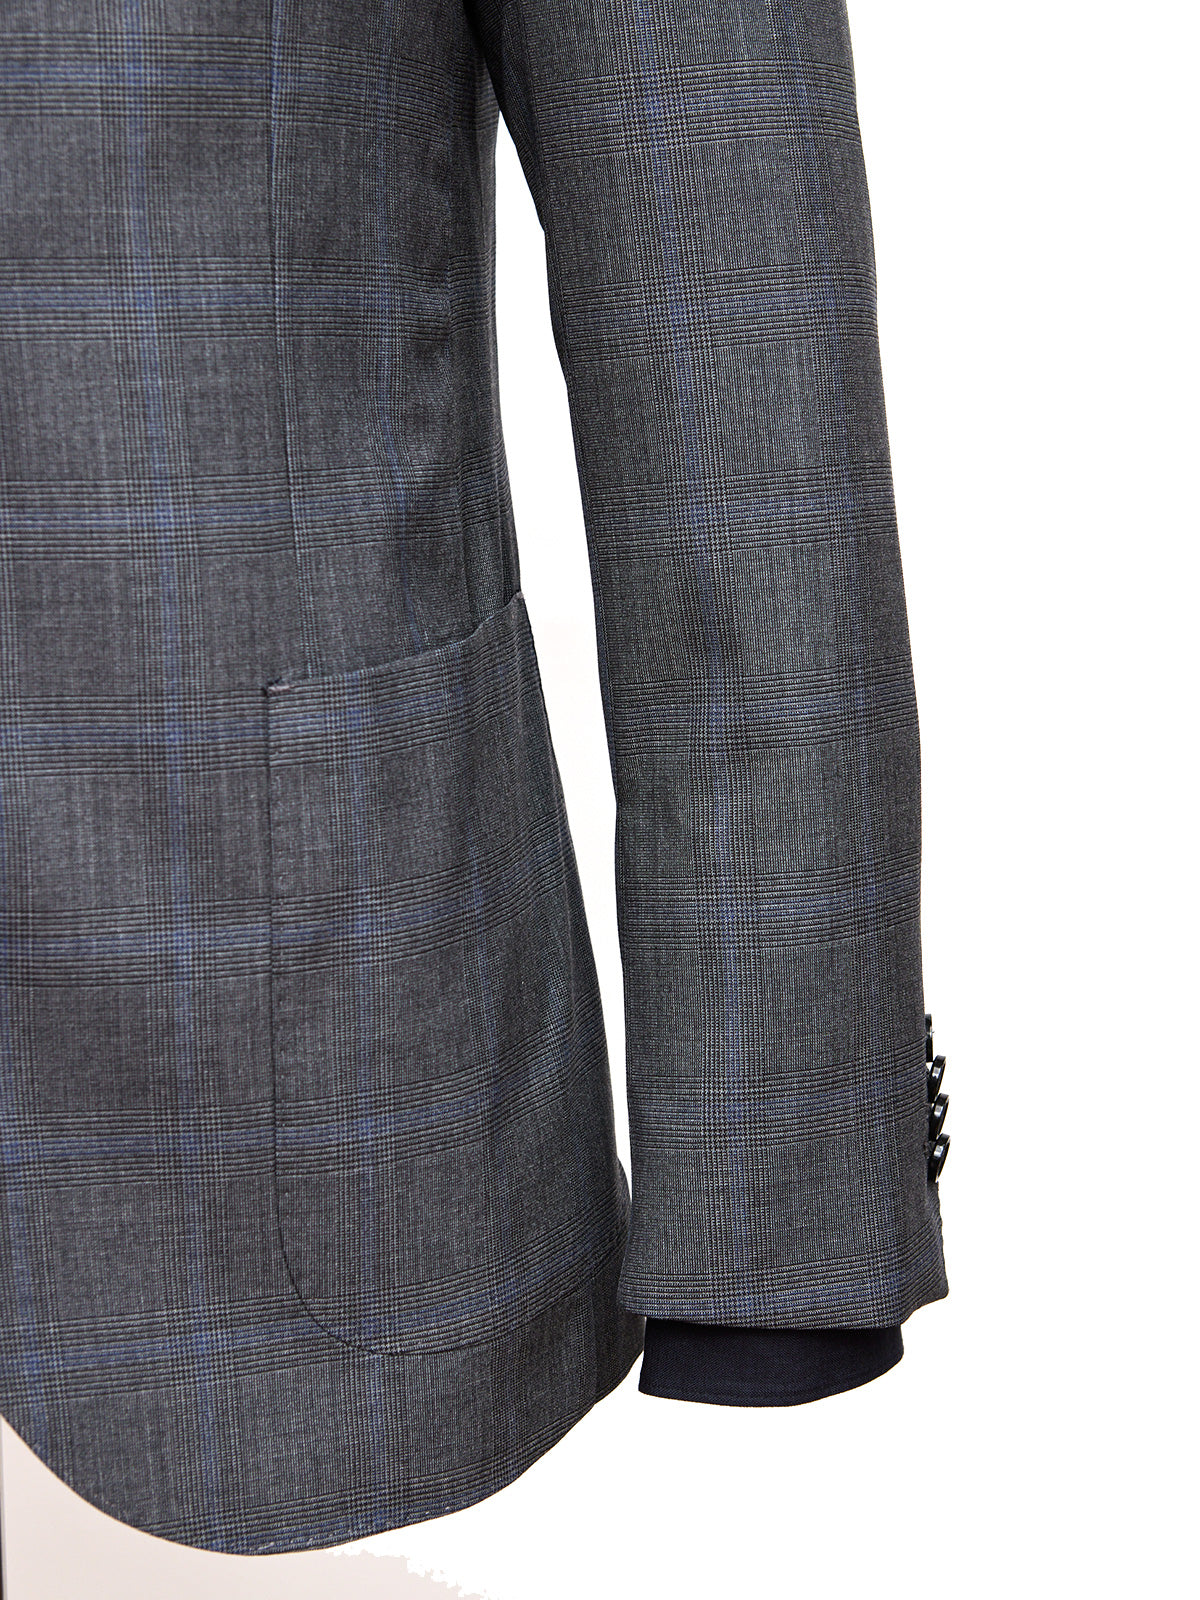 Charcoal Glen Check Wool Suit